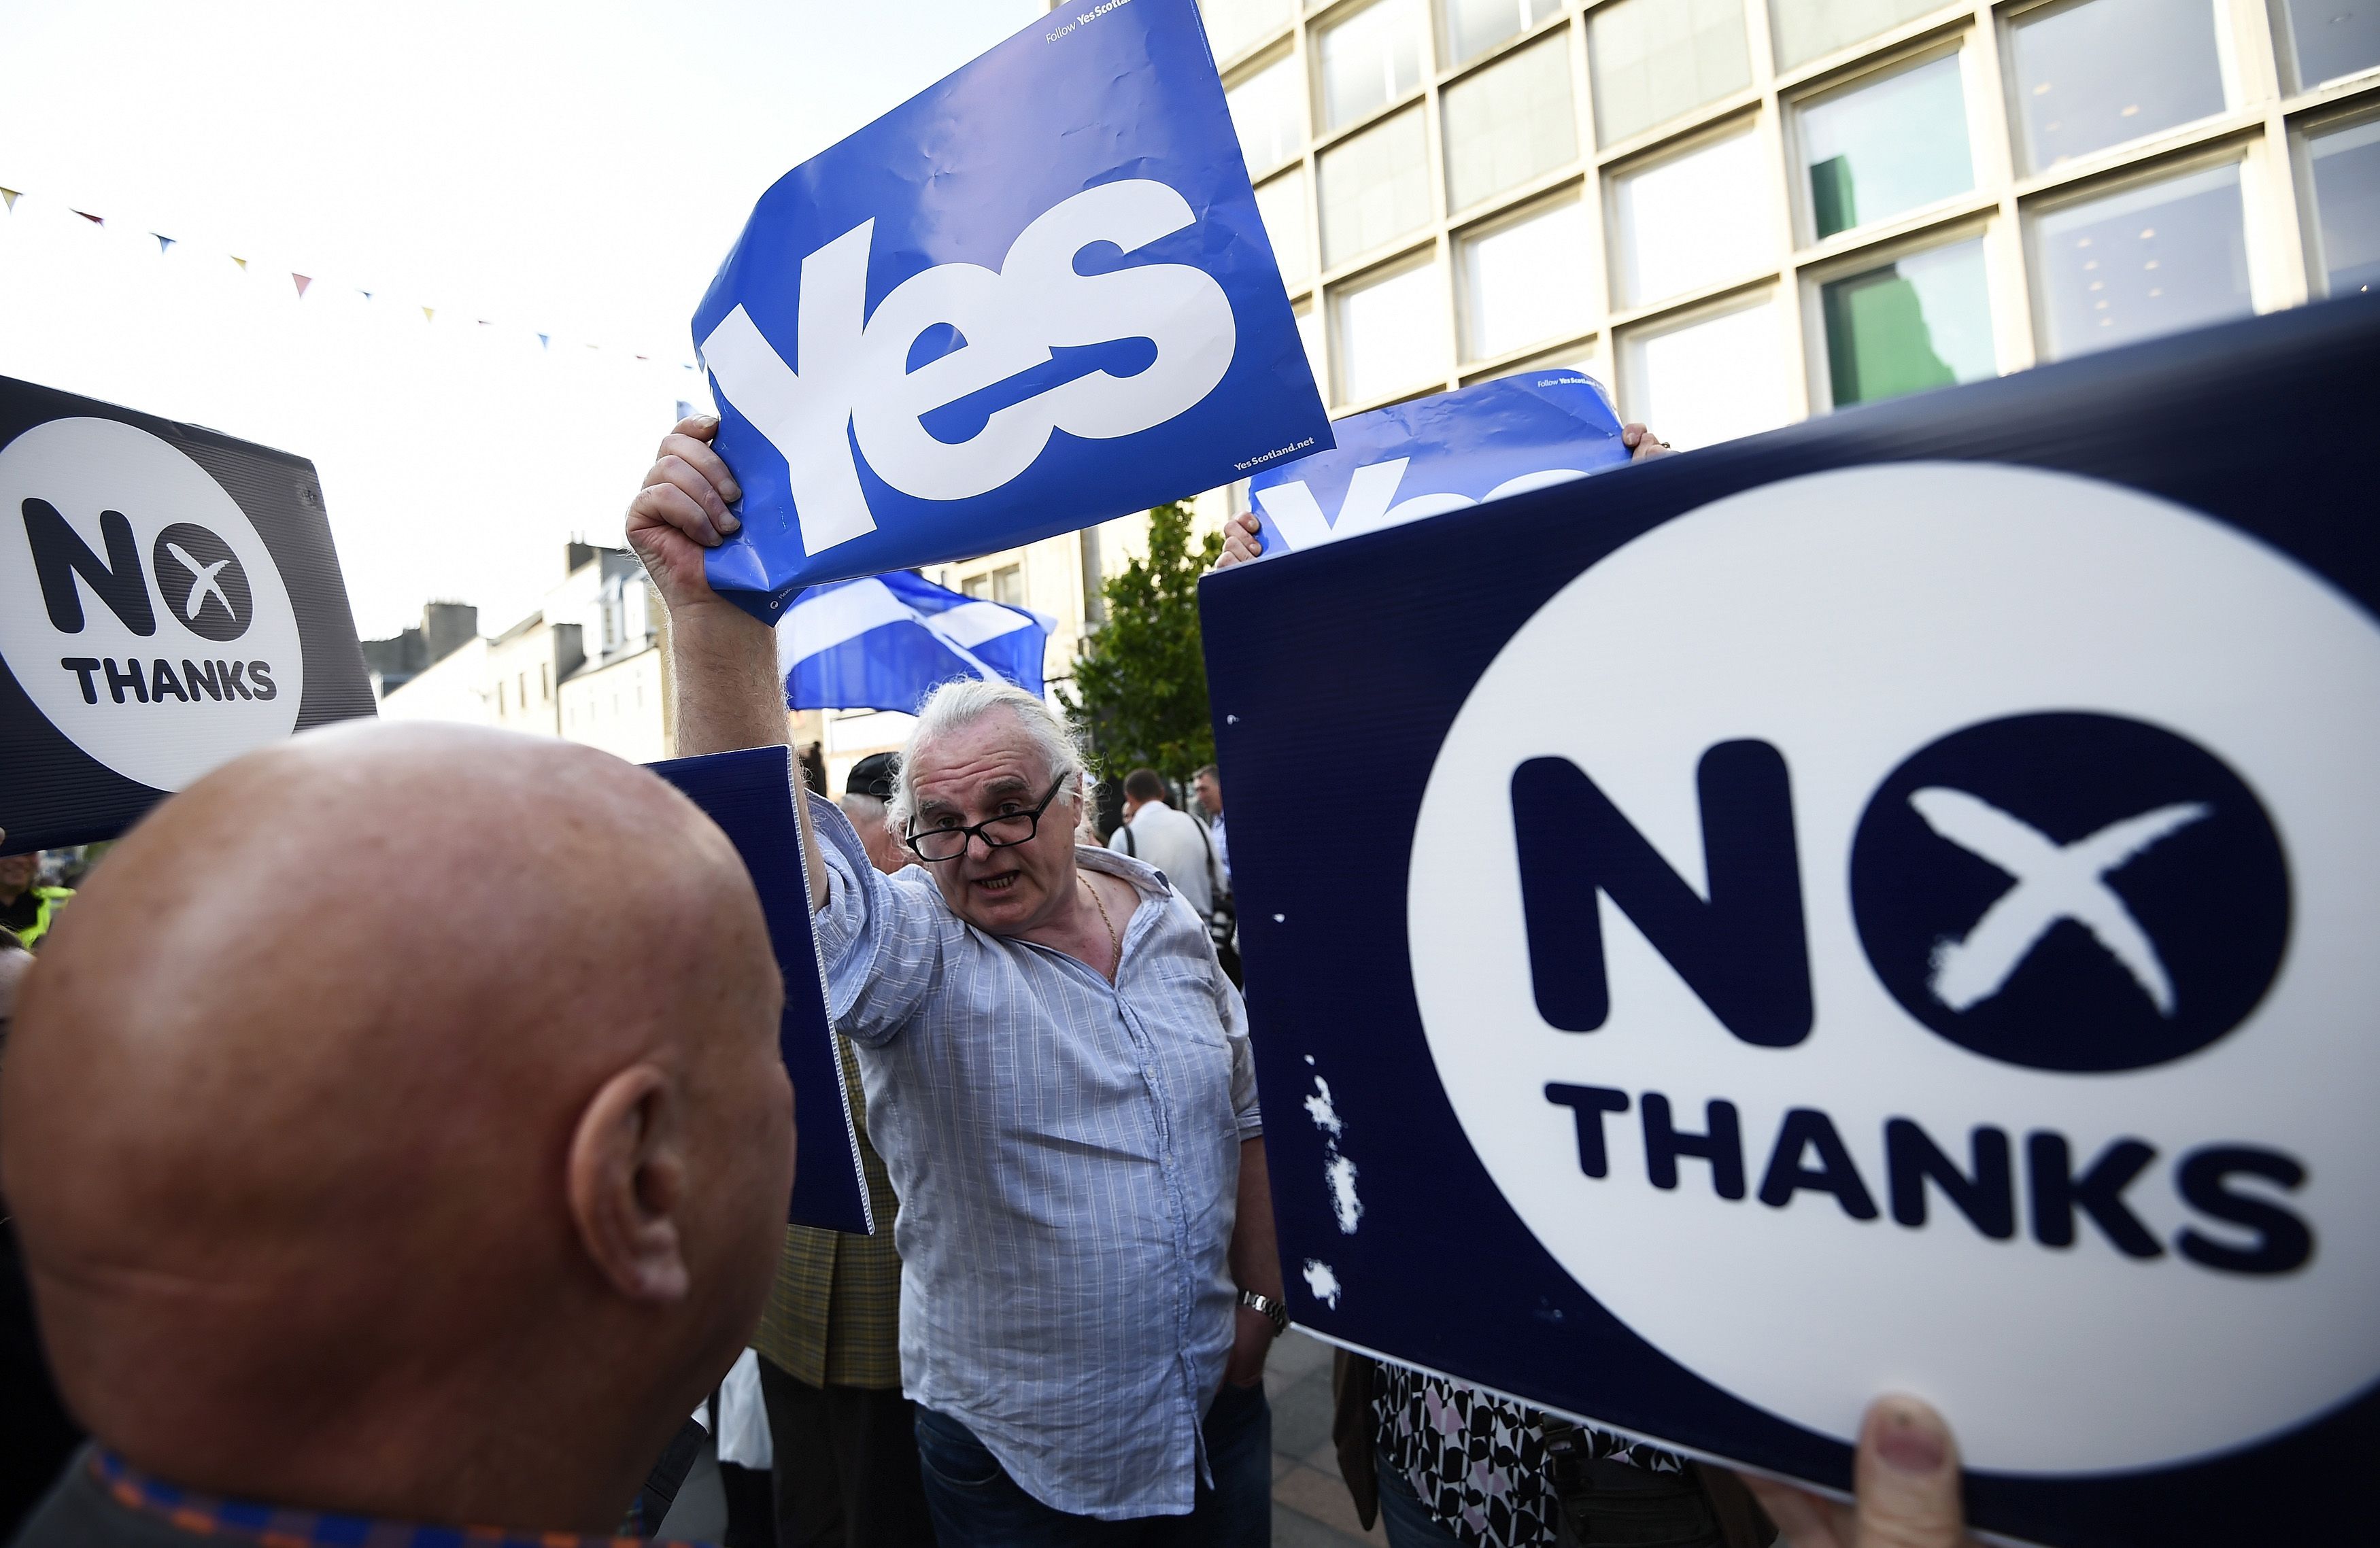 Yes and No voters argue in the run-up to the referendum on Scottish independence last September. Scotland and Hong Kong aren’t closely comparable, but both have confronted issues about political rule. Photo: Reuters